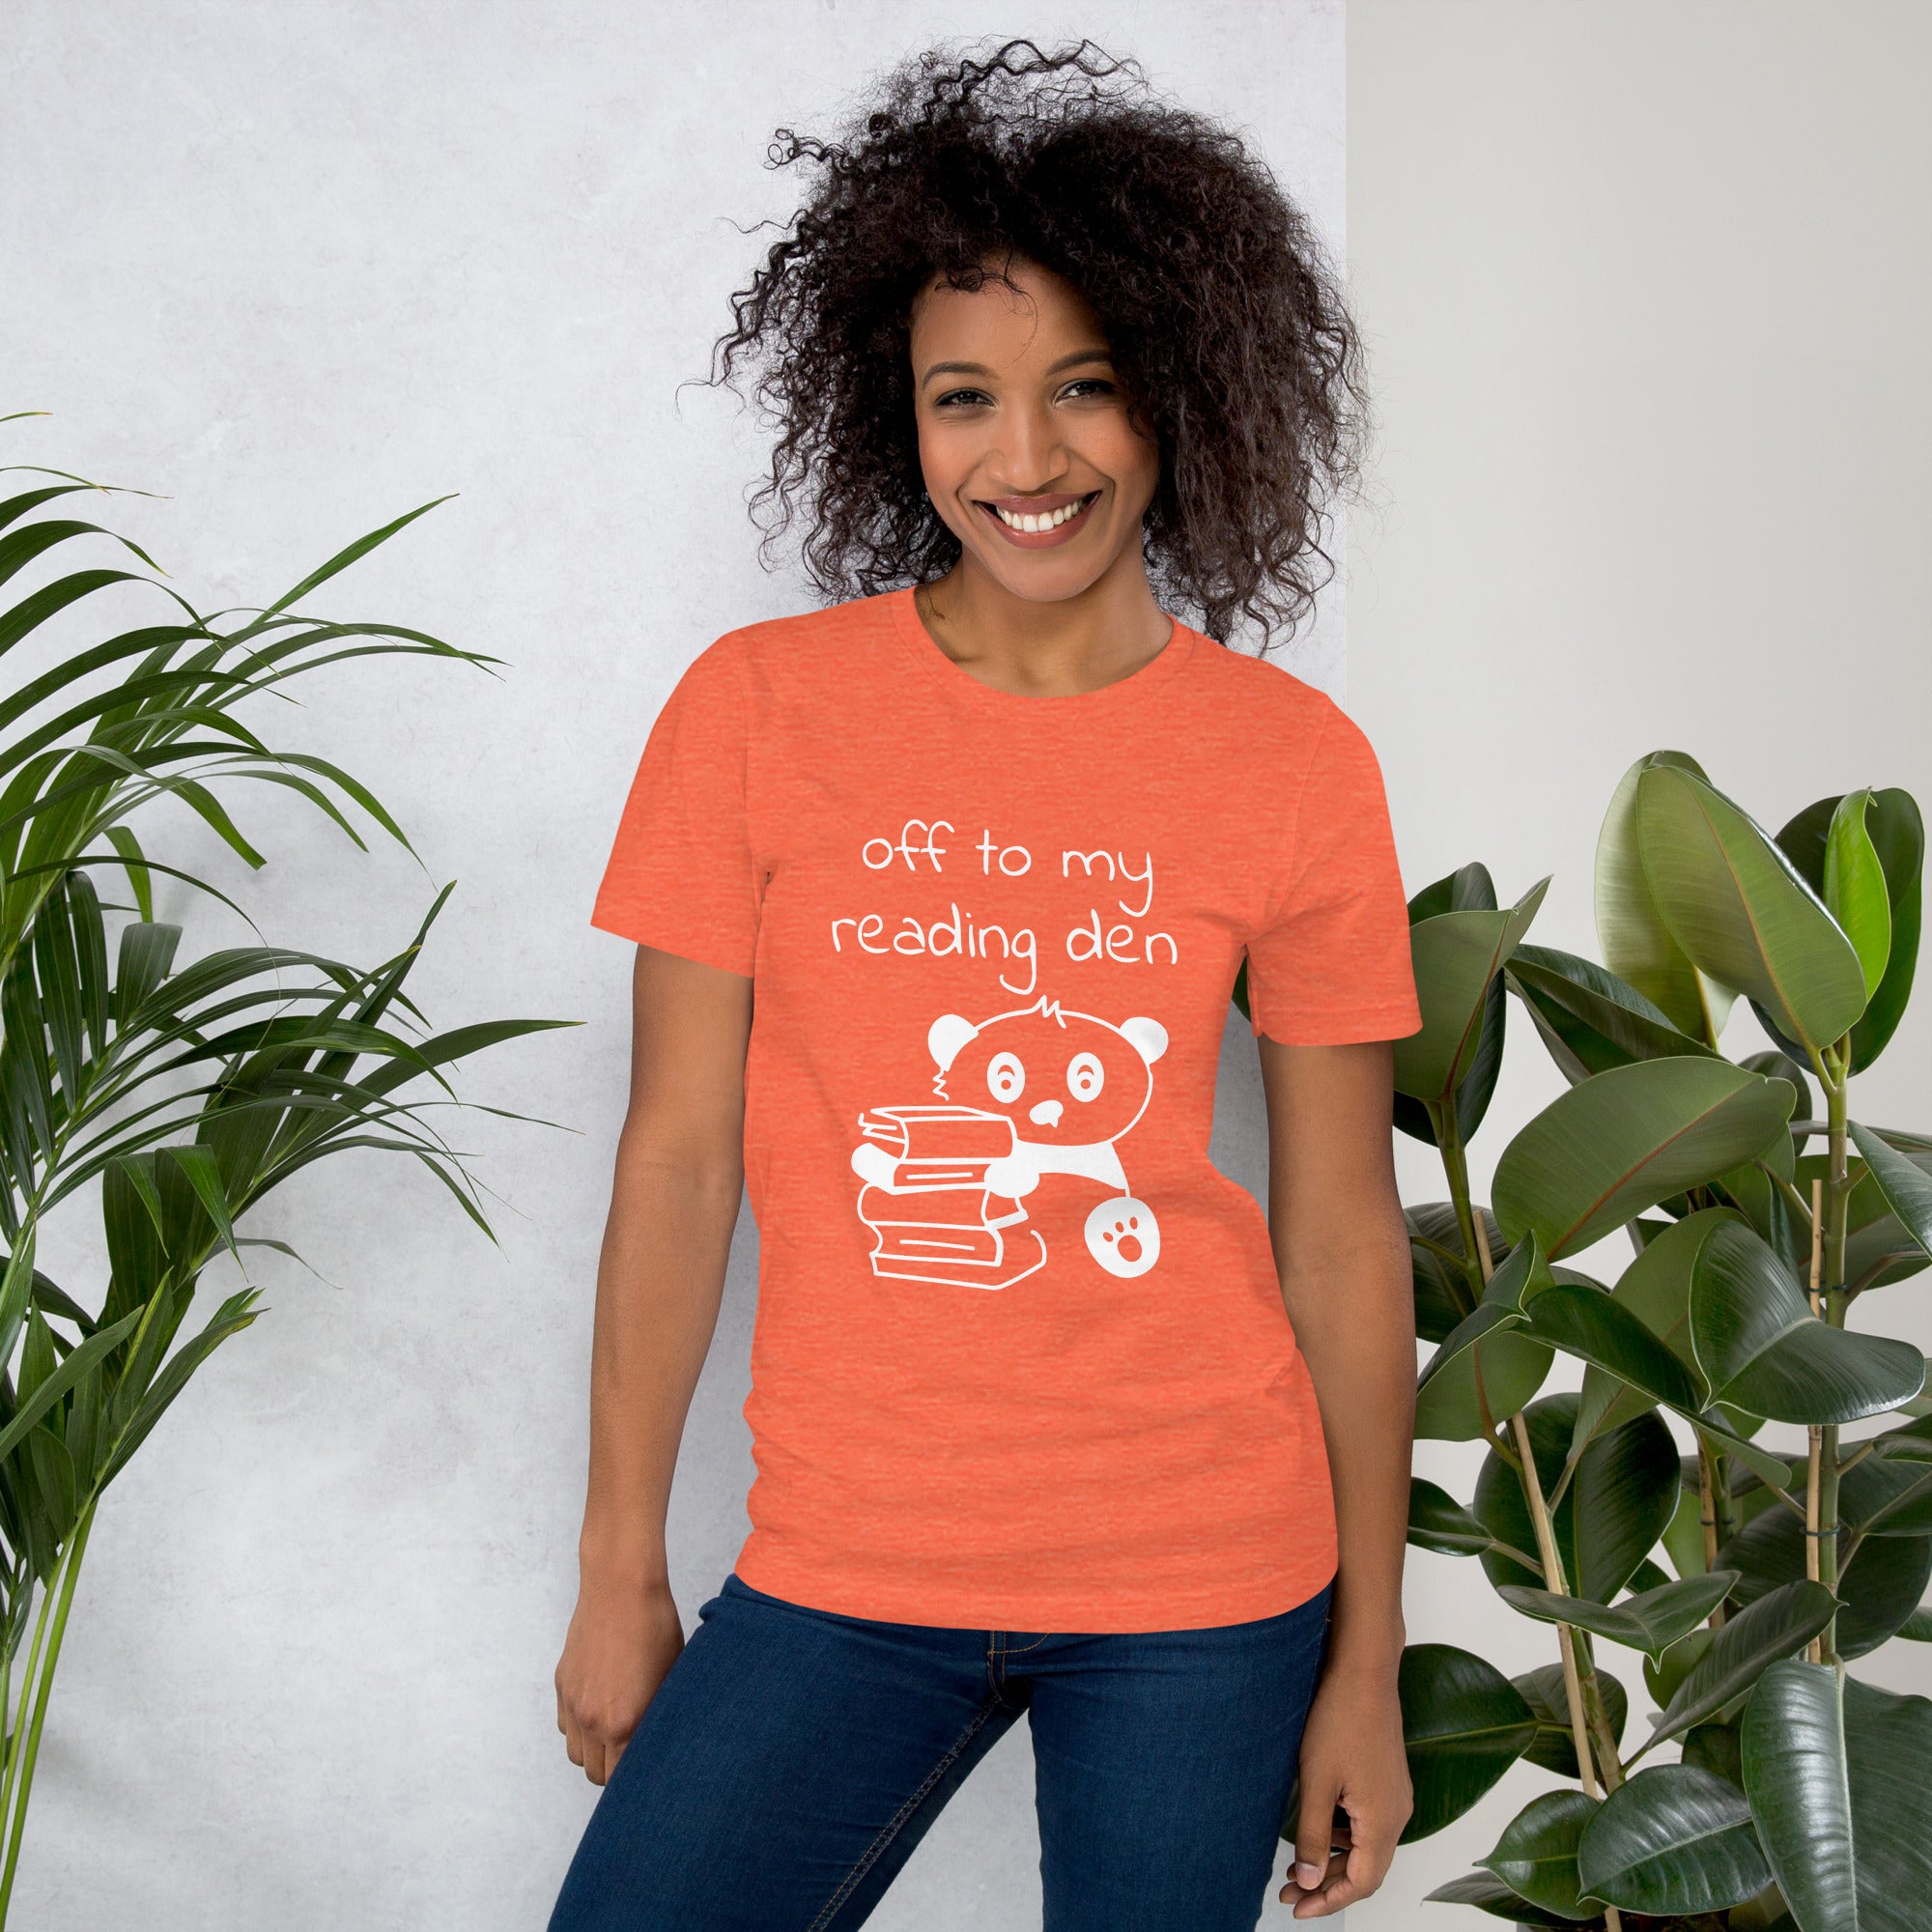 "off to my reading den" t-shirt